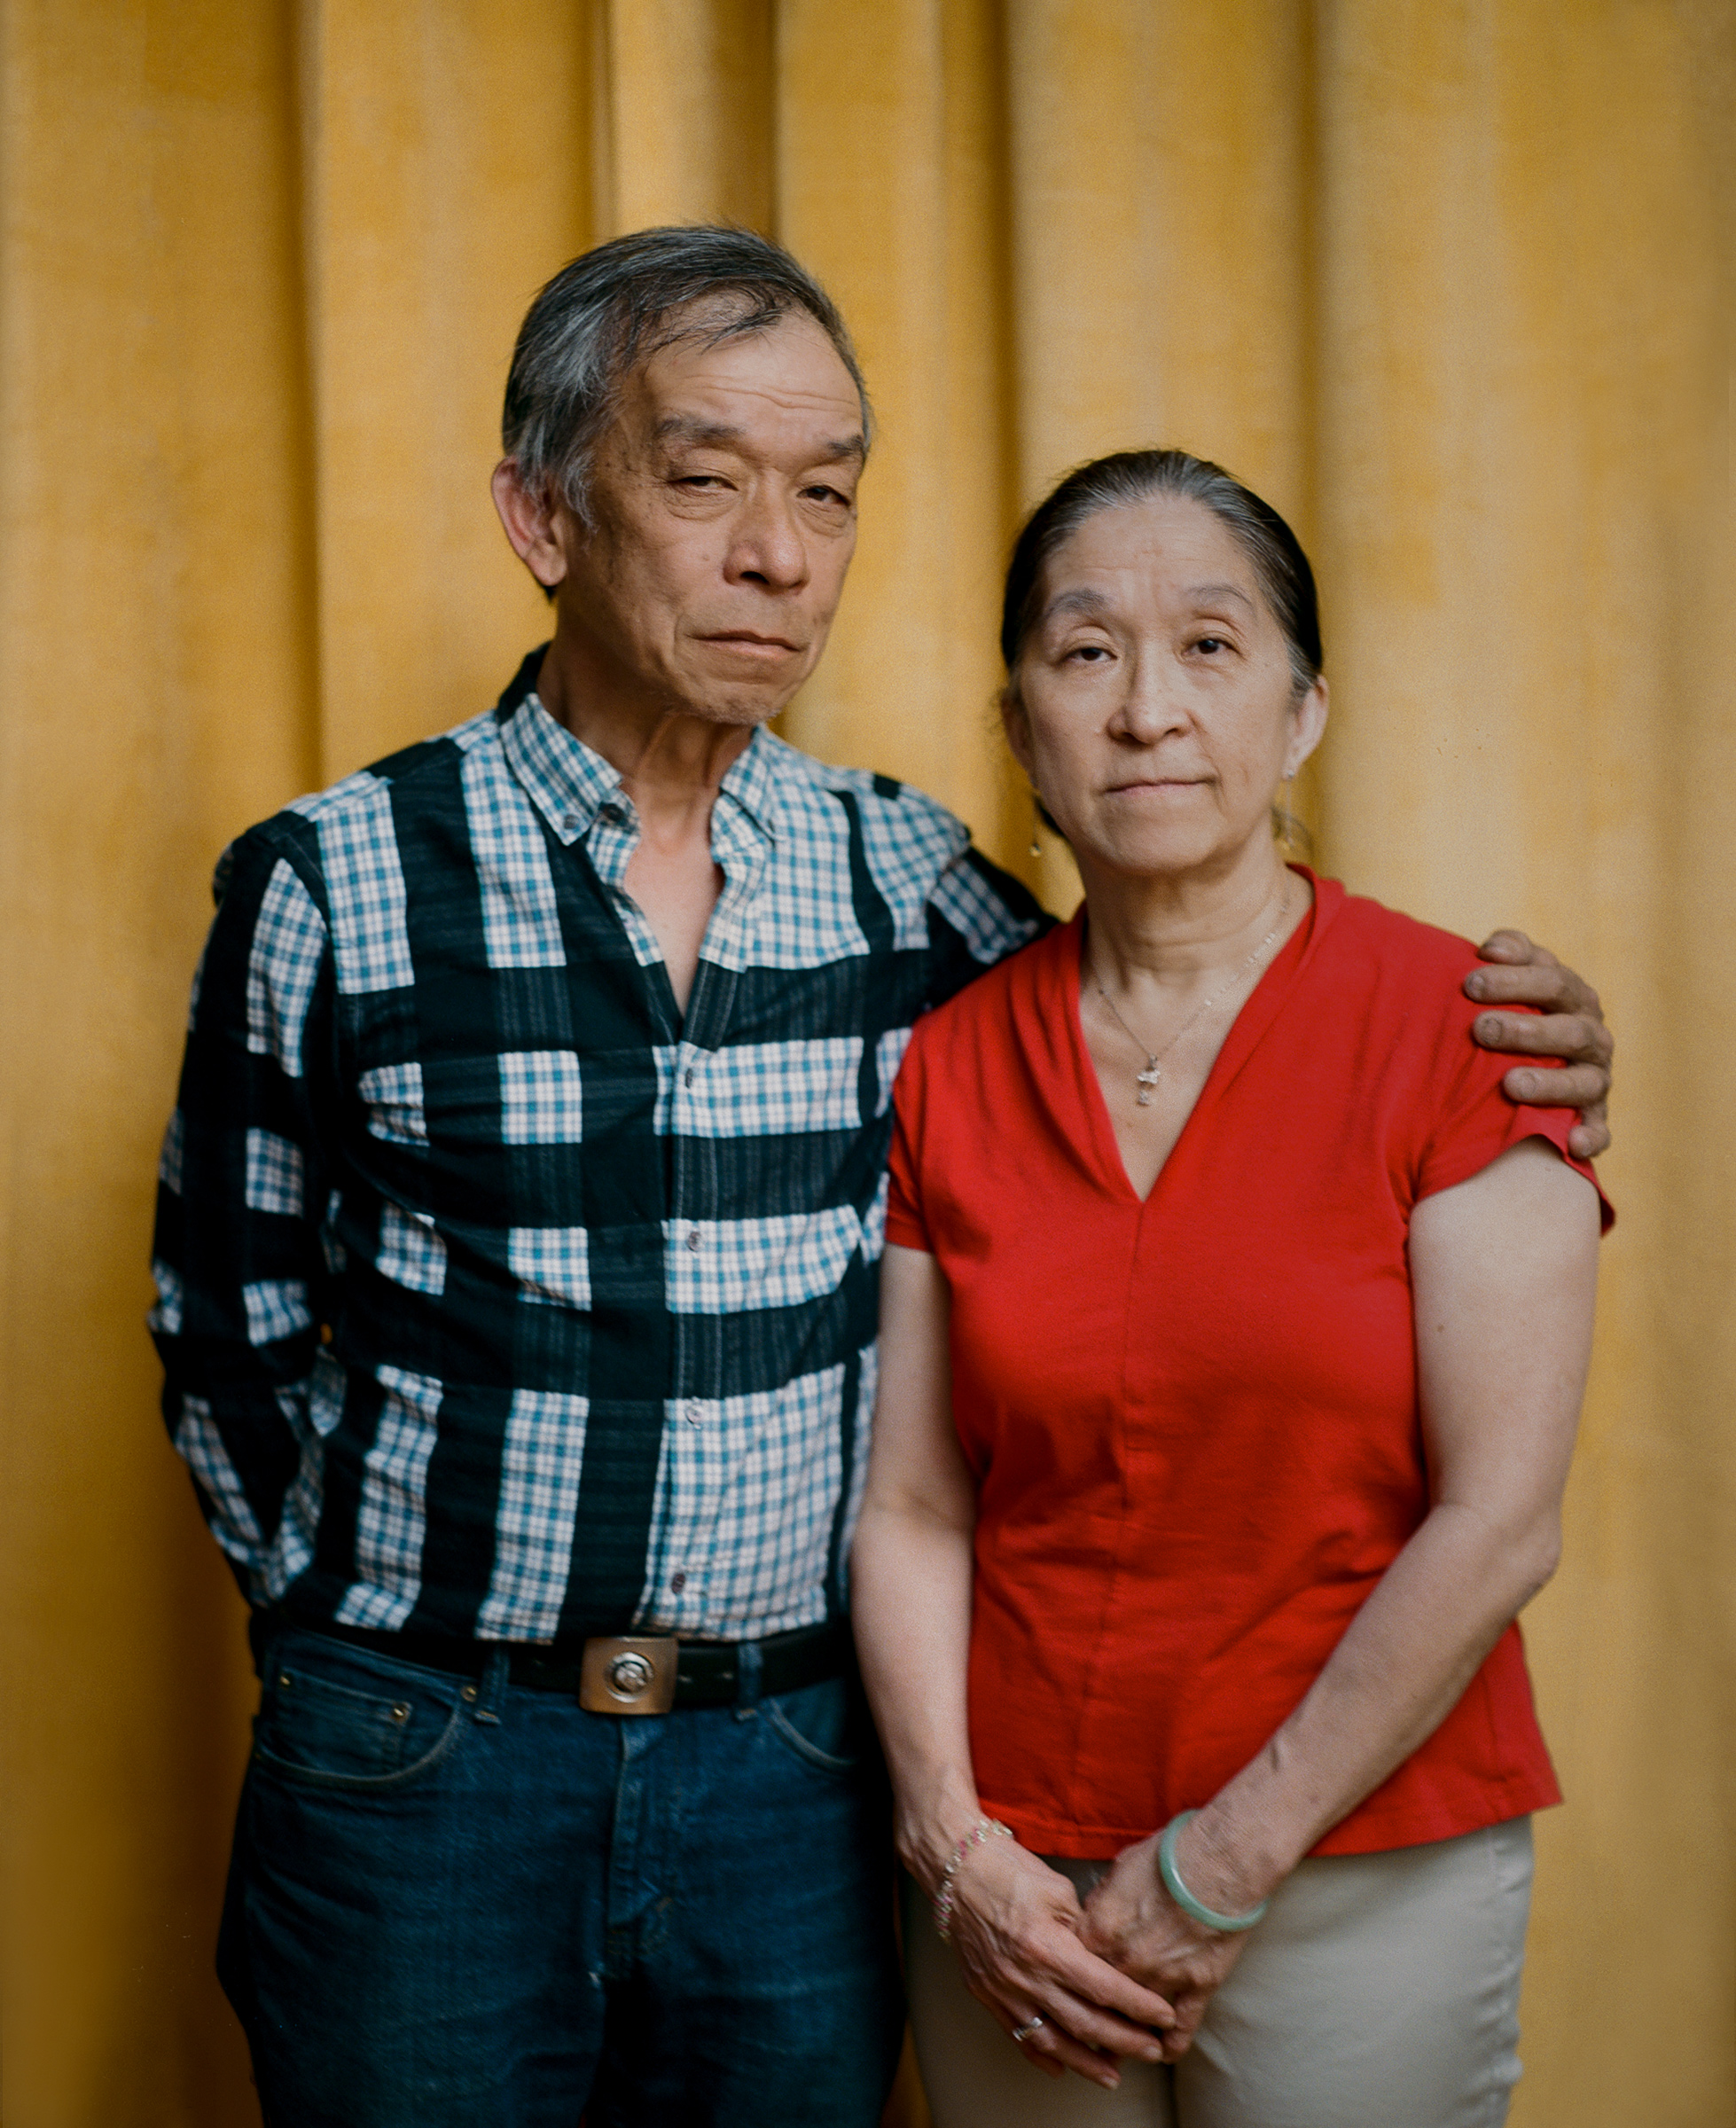 <strong>'I'M PROUD OF WHAT HE DID.' </strong>Tommy Lau, 63, stands beside his older sister Maggie Wong inside his Brooklyn home on May 22. On March 23, Lau rushed to protect an elderly Asian couple who were being robbed of their groceries—a choice that Wong says reflects her brother’s typical boldness. But when Lau intervened, the man spat on his face, punched him on the side of his head and called him a racial slur. Lau has not been able to return to work as a New York City bus driver, because of neck and shoulder injuries he sustained during the attack. Wong, 66, says it’s been difficult to watch her brother continue to struggle months later. “I feel bad,” she says, adding that she supports Lau, emotionally and financially, whenever he needs it. “I’m proud of what he did.” Meanwhile, despite all that he’s endured, Lau doesn’t regret getting involved that day. Since immigrating to the U.S. from Hong Kong at age 3, he has long faced racism—his elementary-school classmates bullied him so often about his birth name, Kok Wah Lau, that his teacher changed it to Tommy—and he has had enough. “The lowest low of people does that, attacking the elderly,” he says. “I just couldn’t take it anymore.” (Emanuel Hahn for TIME)